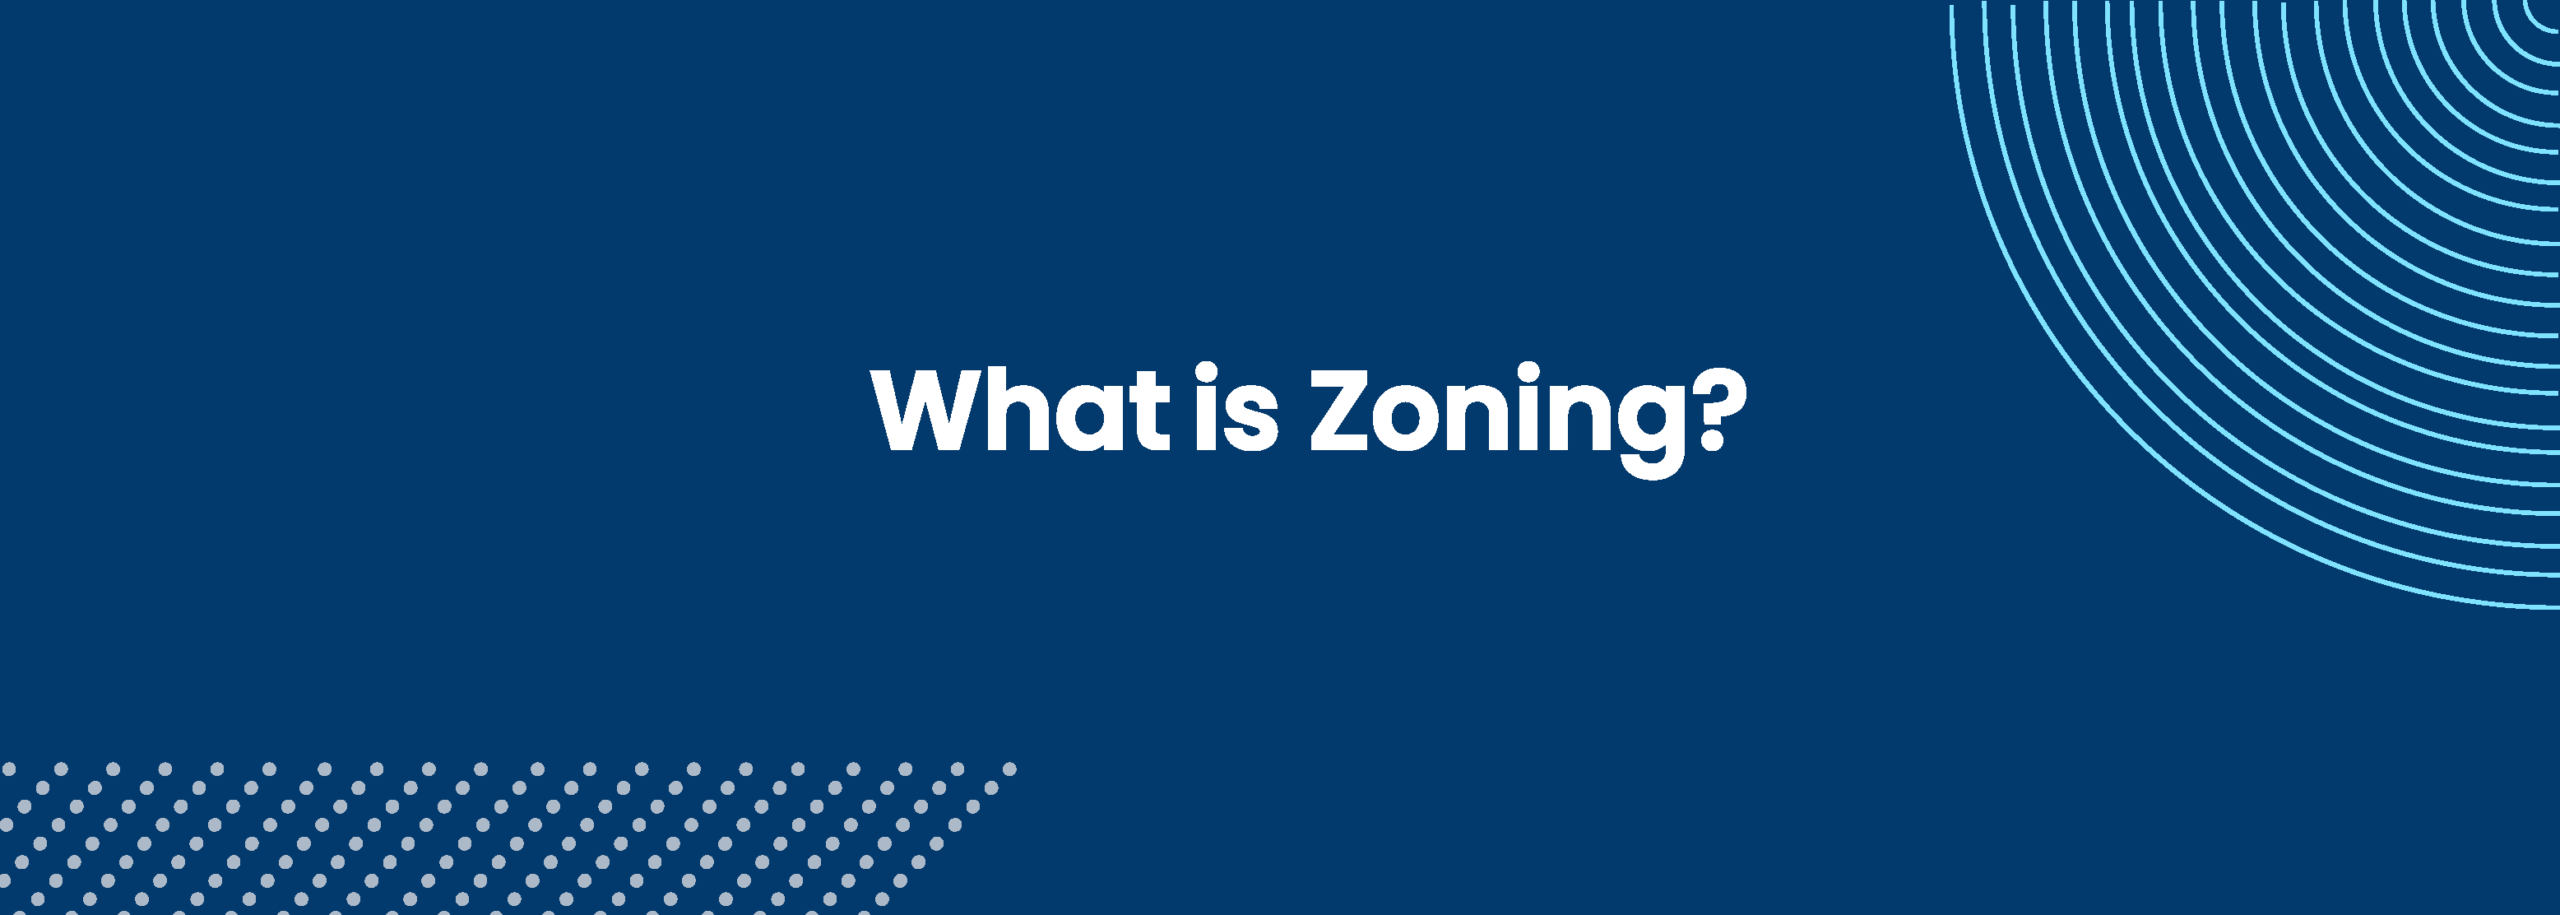 Zoning consists of a set of regulations that control how land is used, including what types of buildings can be constructed, where they can be built, and what activities can take place there.